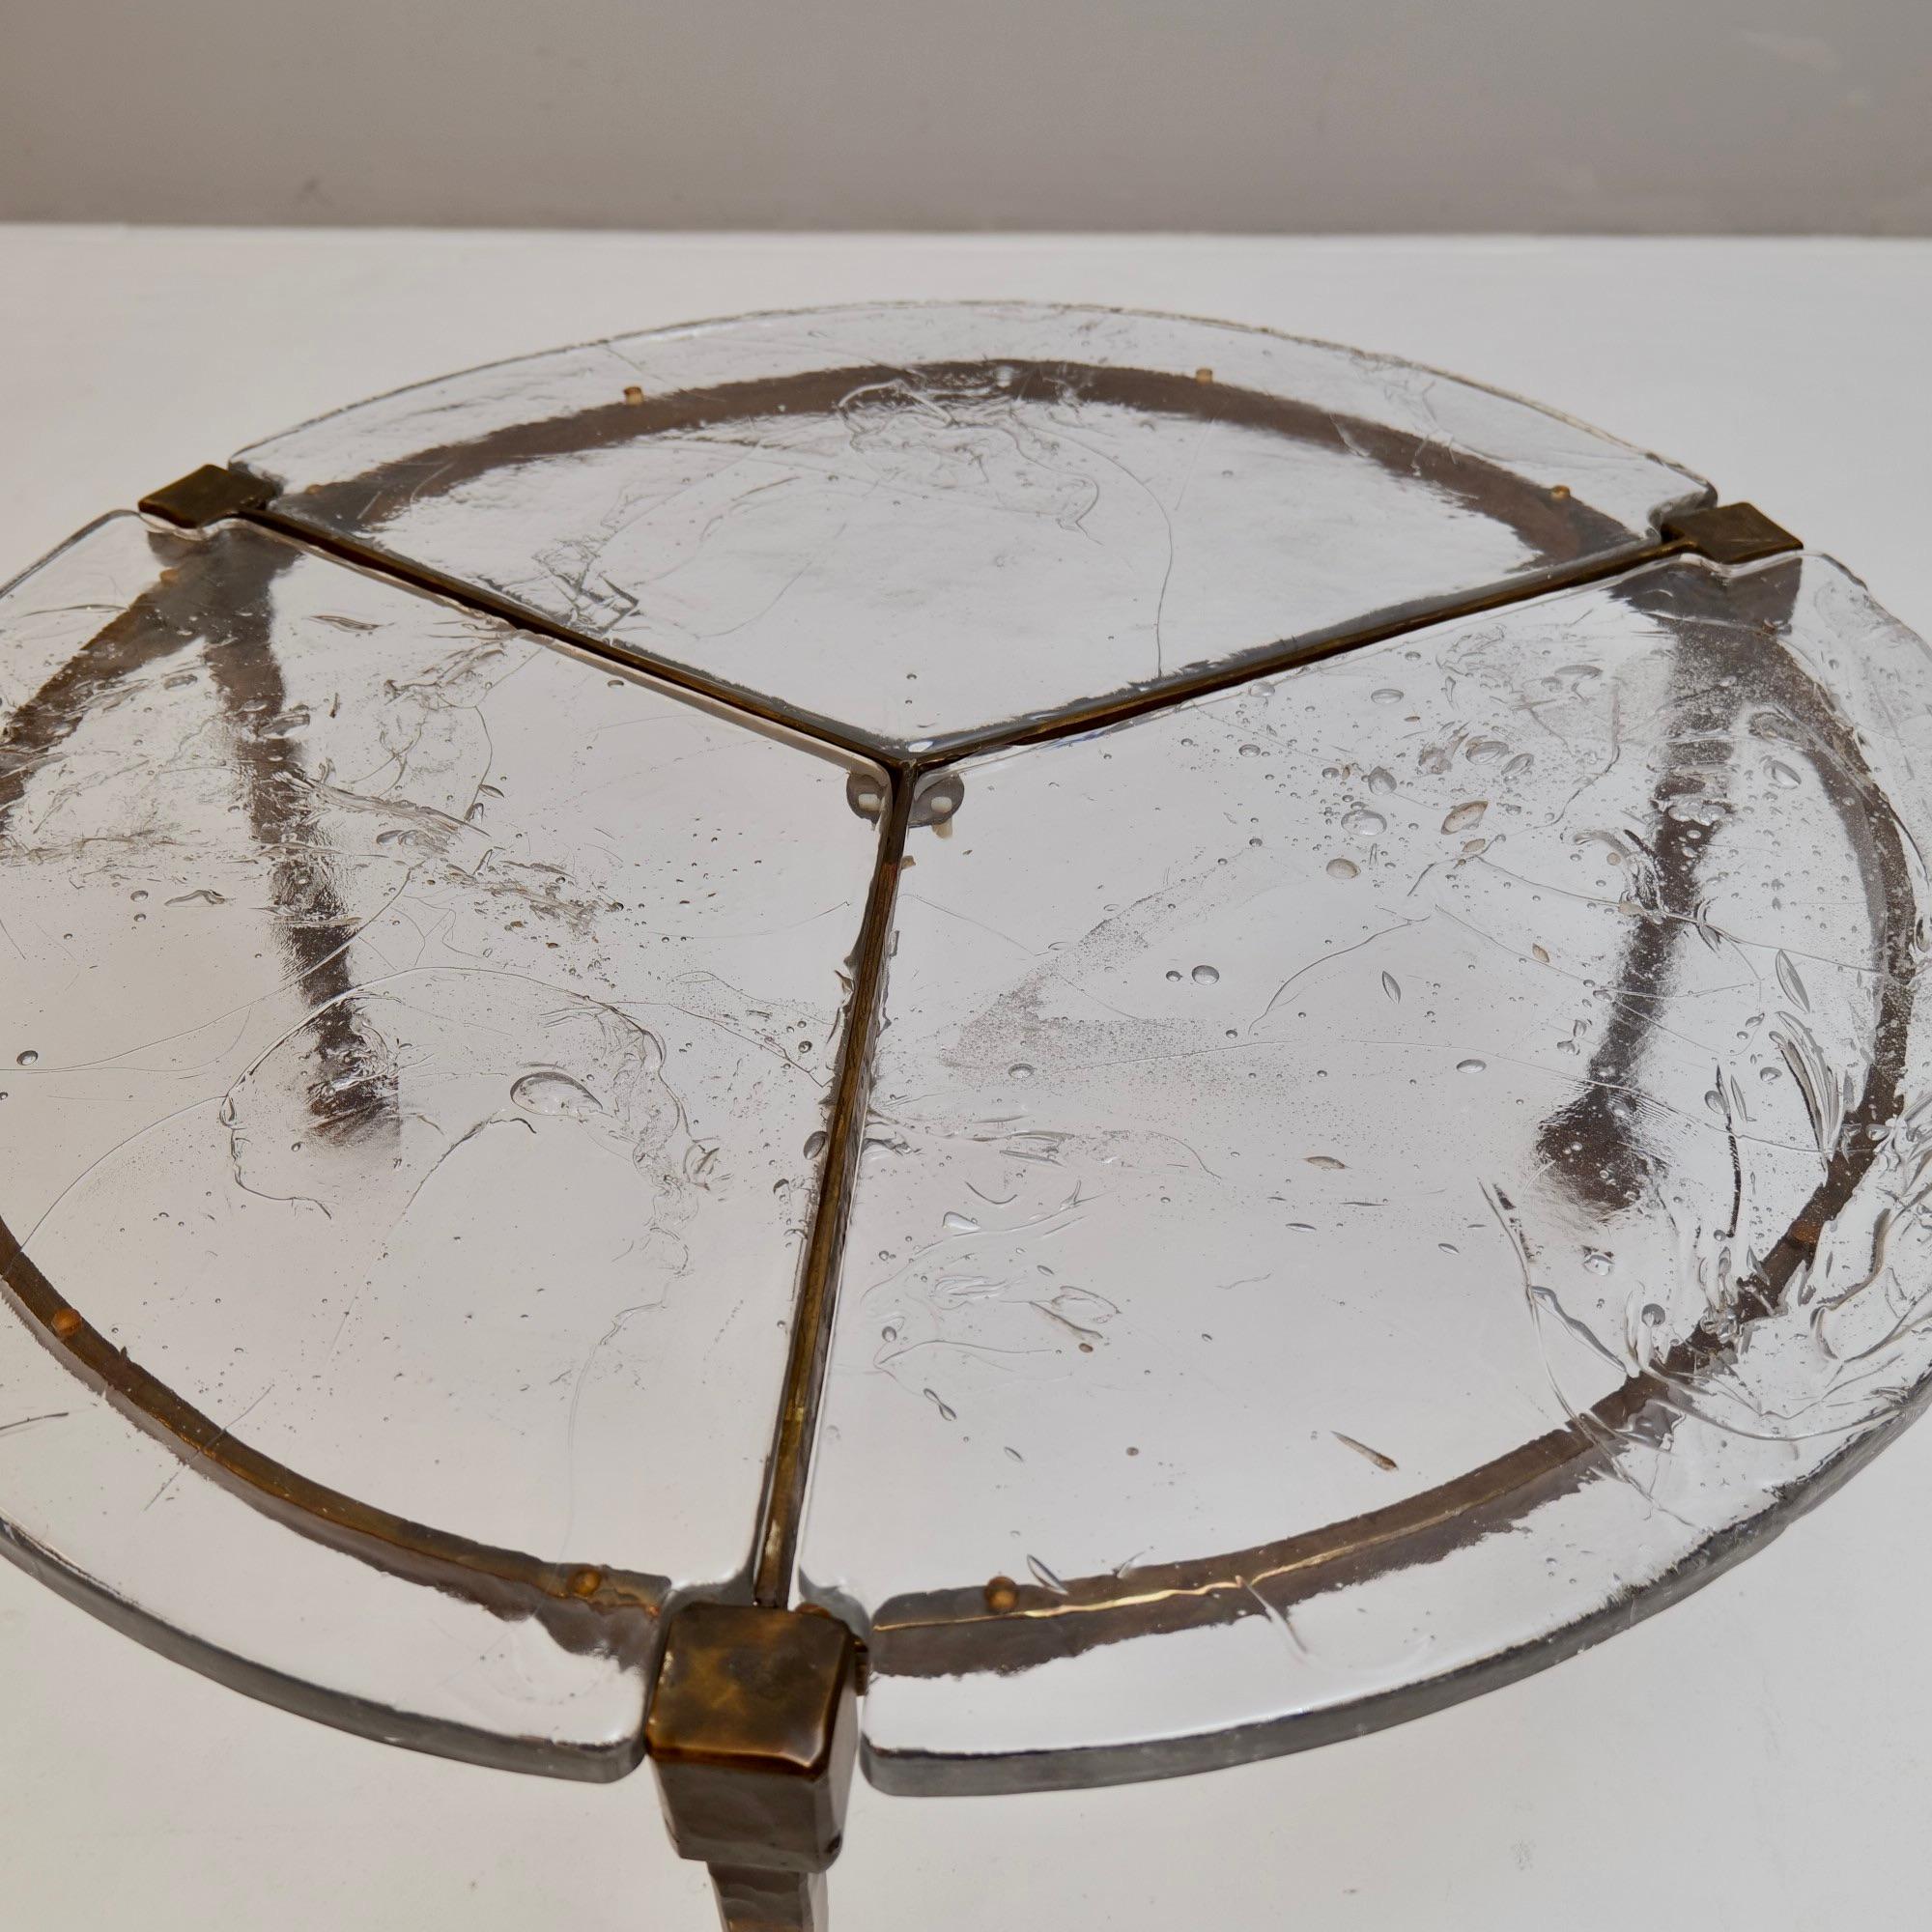 Cast forged bronze & glass table by Lothar Klute - 1980s